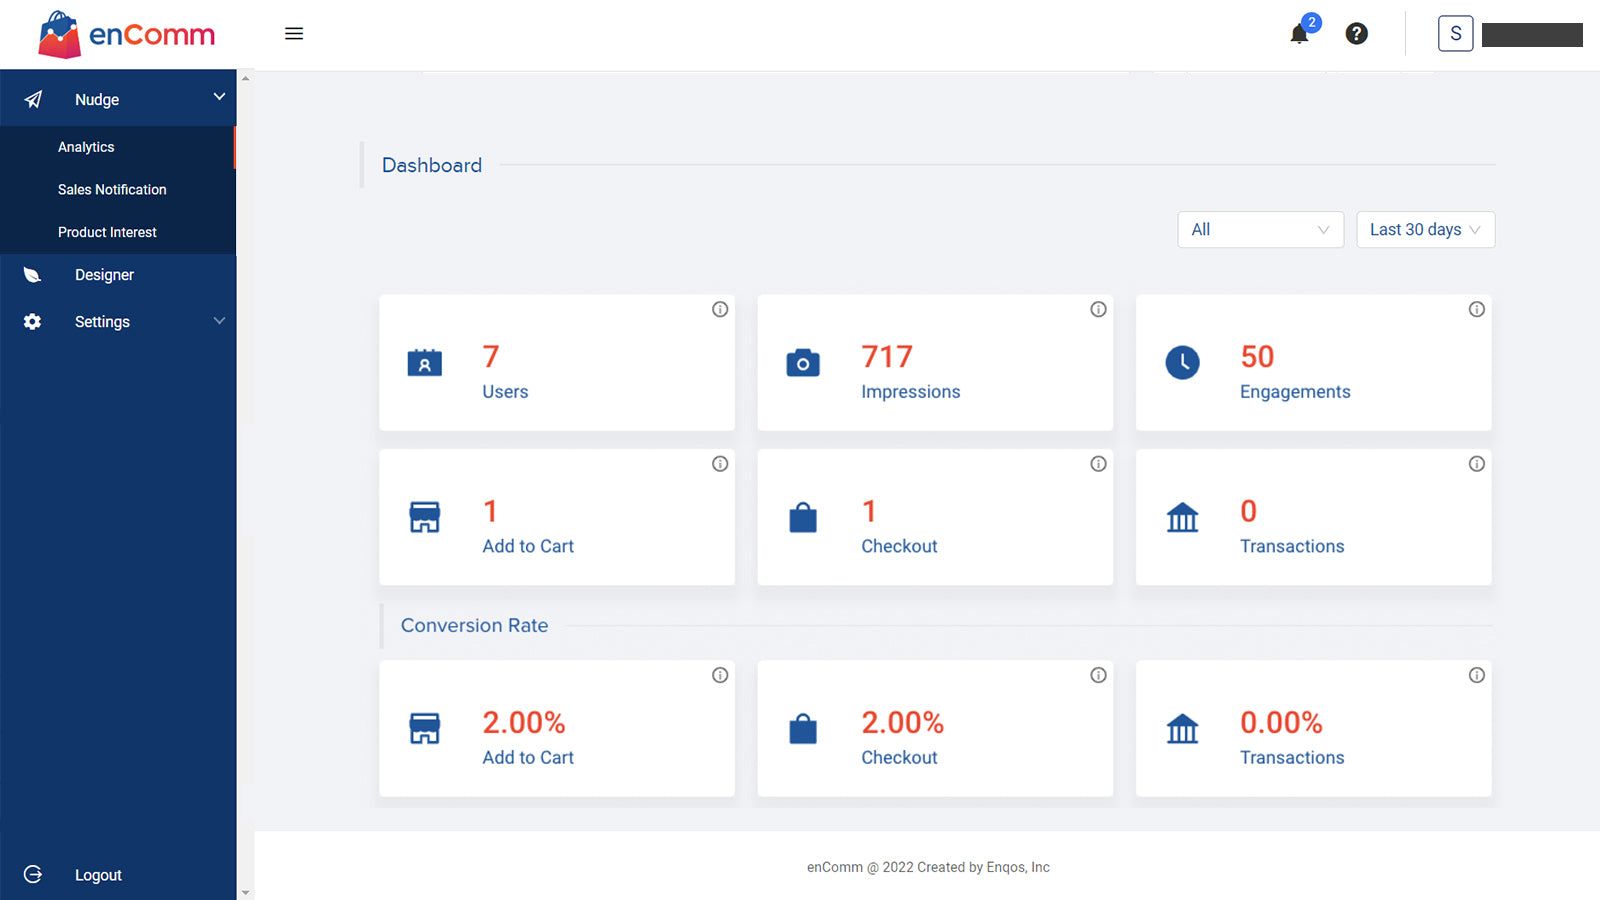 An overview of Encomm Nudge Analytics Dashboard